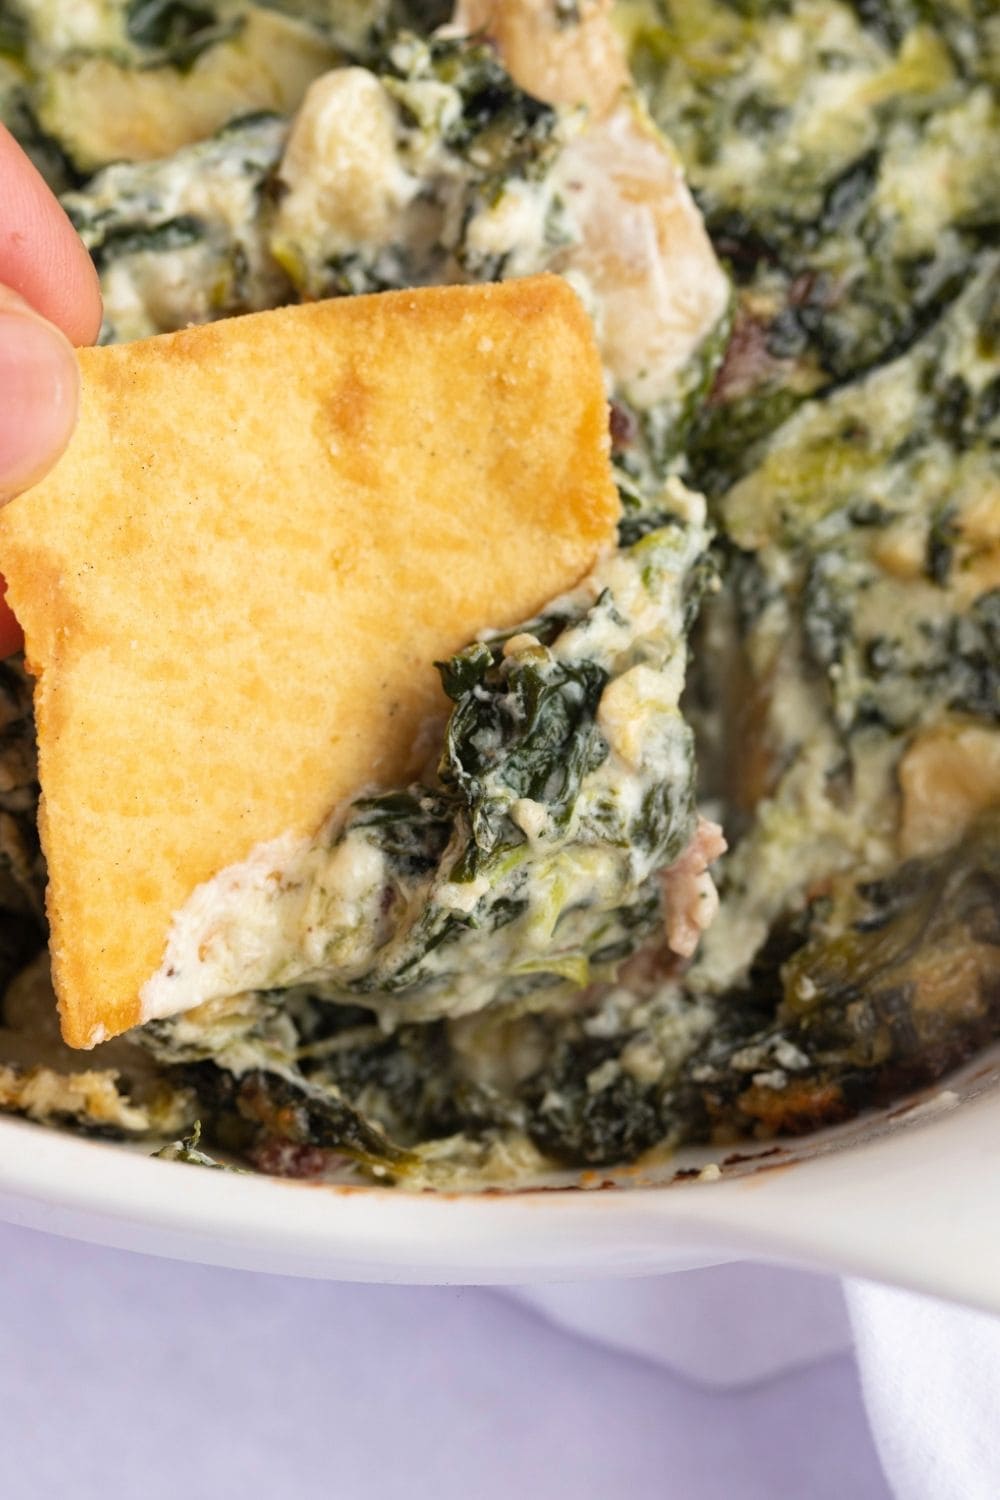 Creamy Spinach Artichoke Dip with Chips